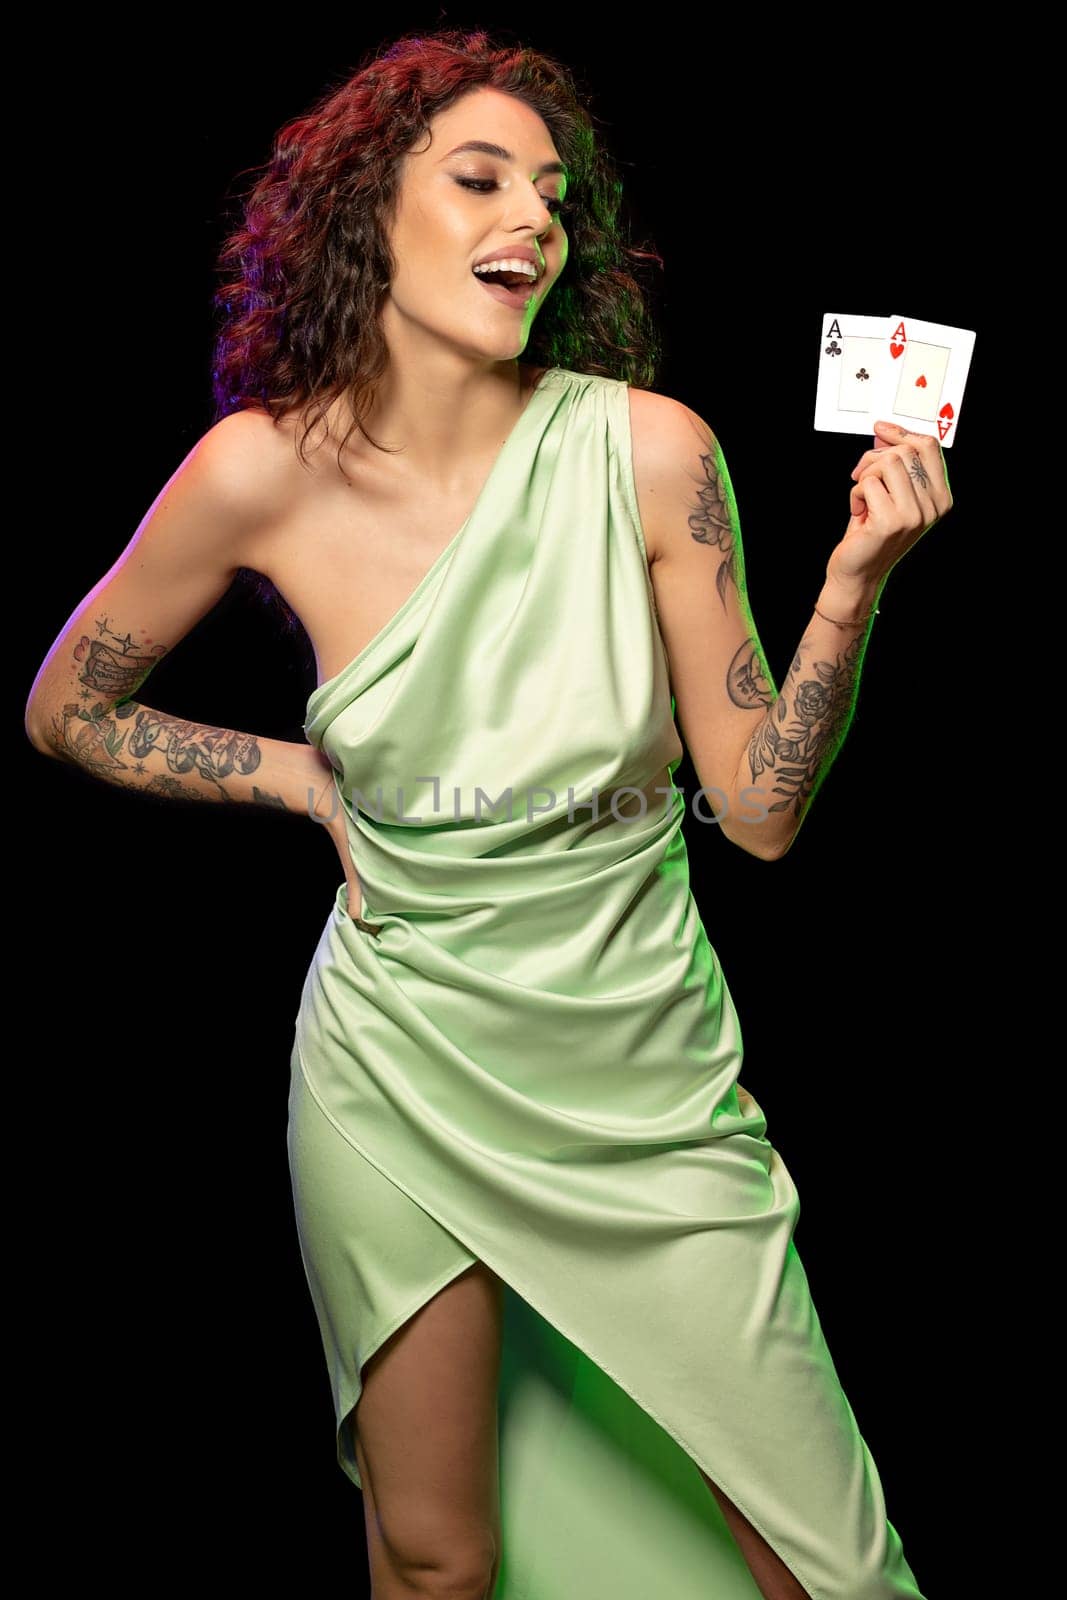 Cheerful young woman with wavy dark hair and tattoos on arms wearing light green dress standing against black background, holding set of winning cards of pair of aces. Successful gambling concept